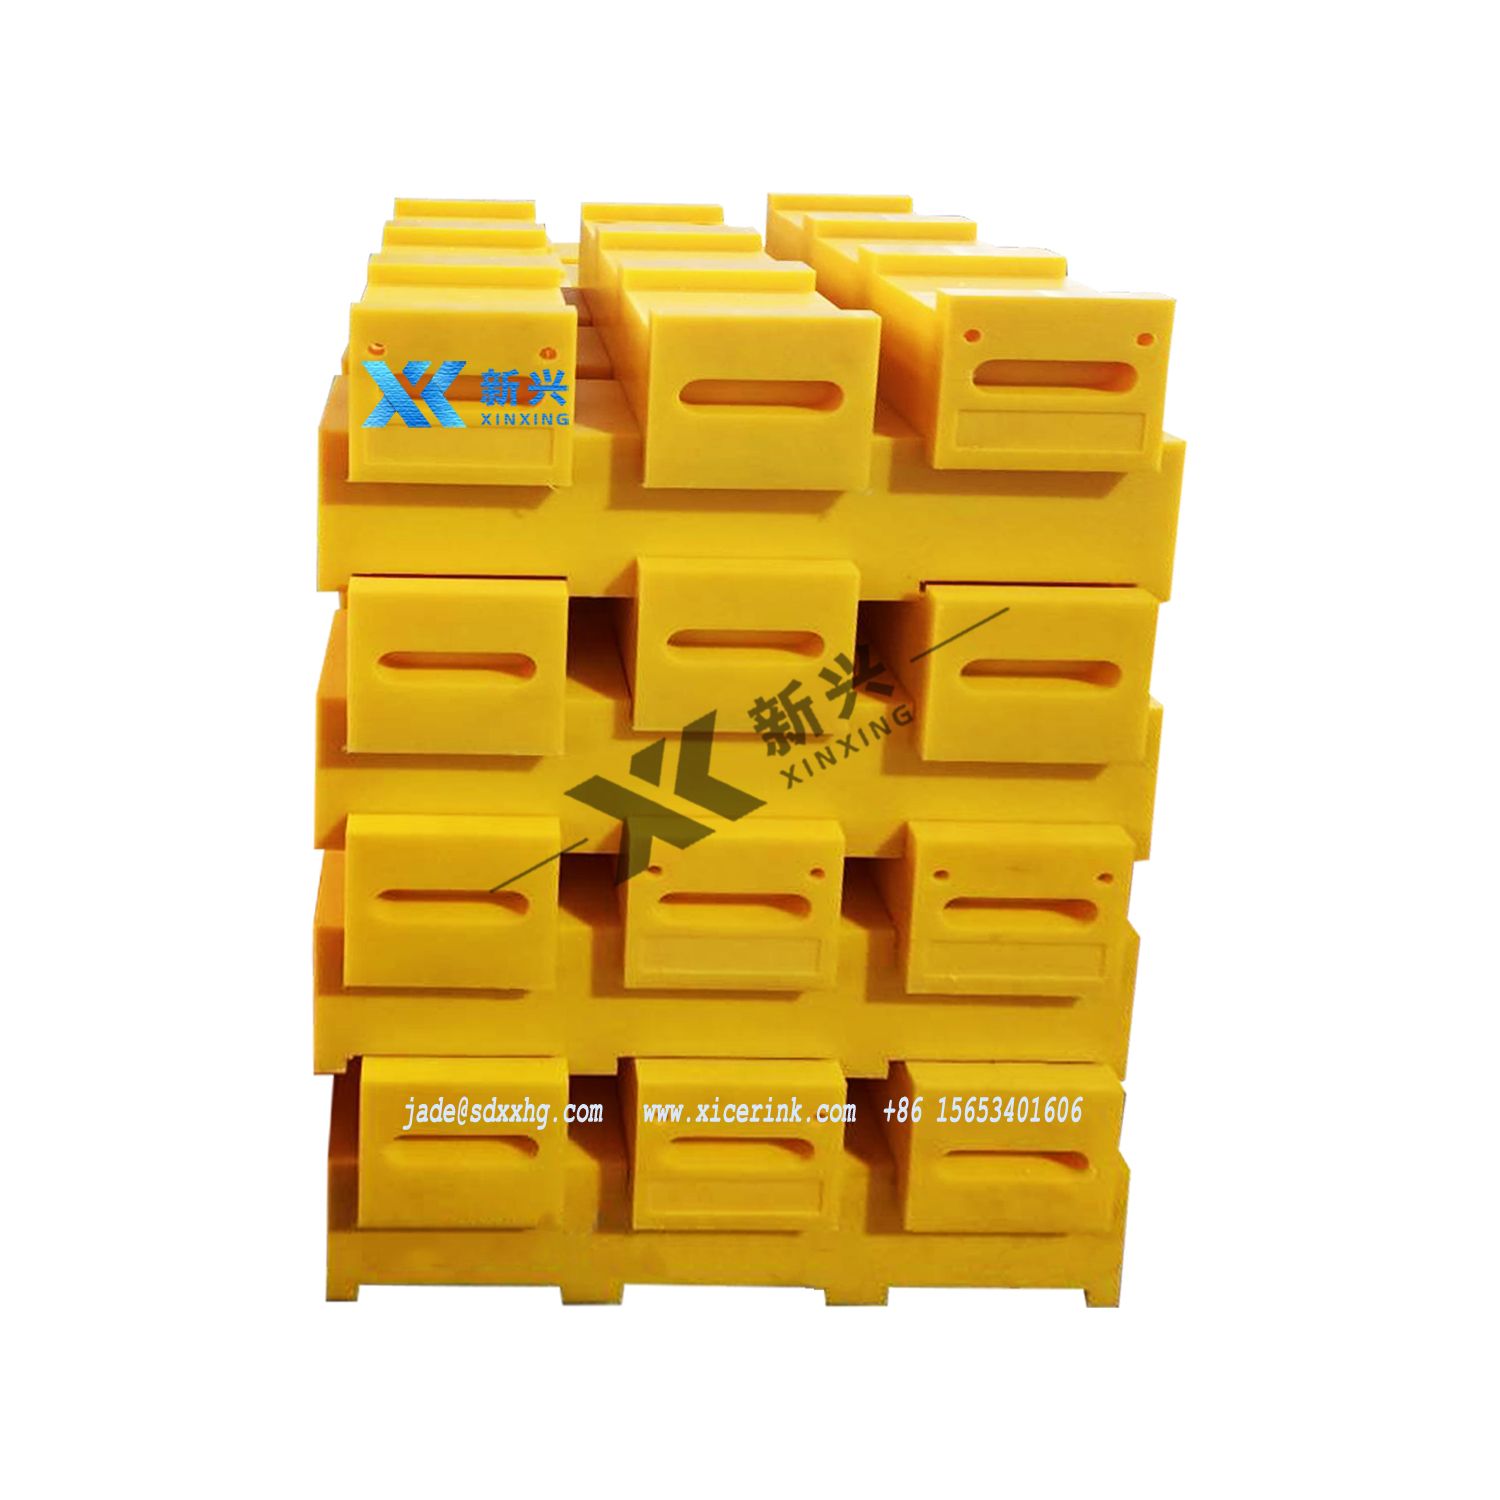 cribbing blocks for Ground Stabilization Stacking up